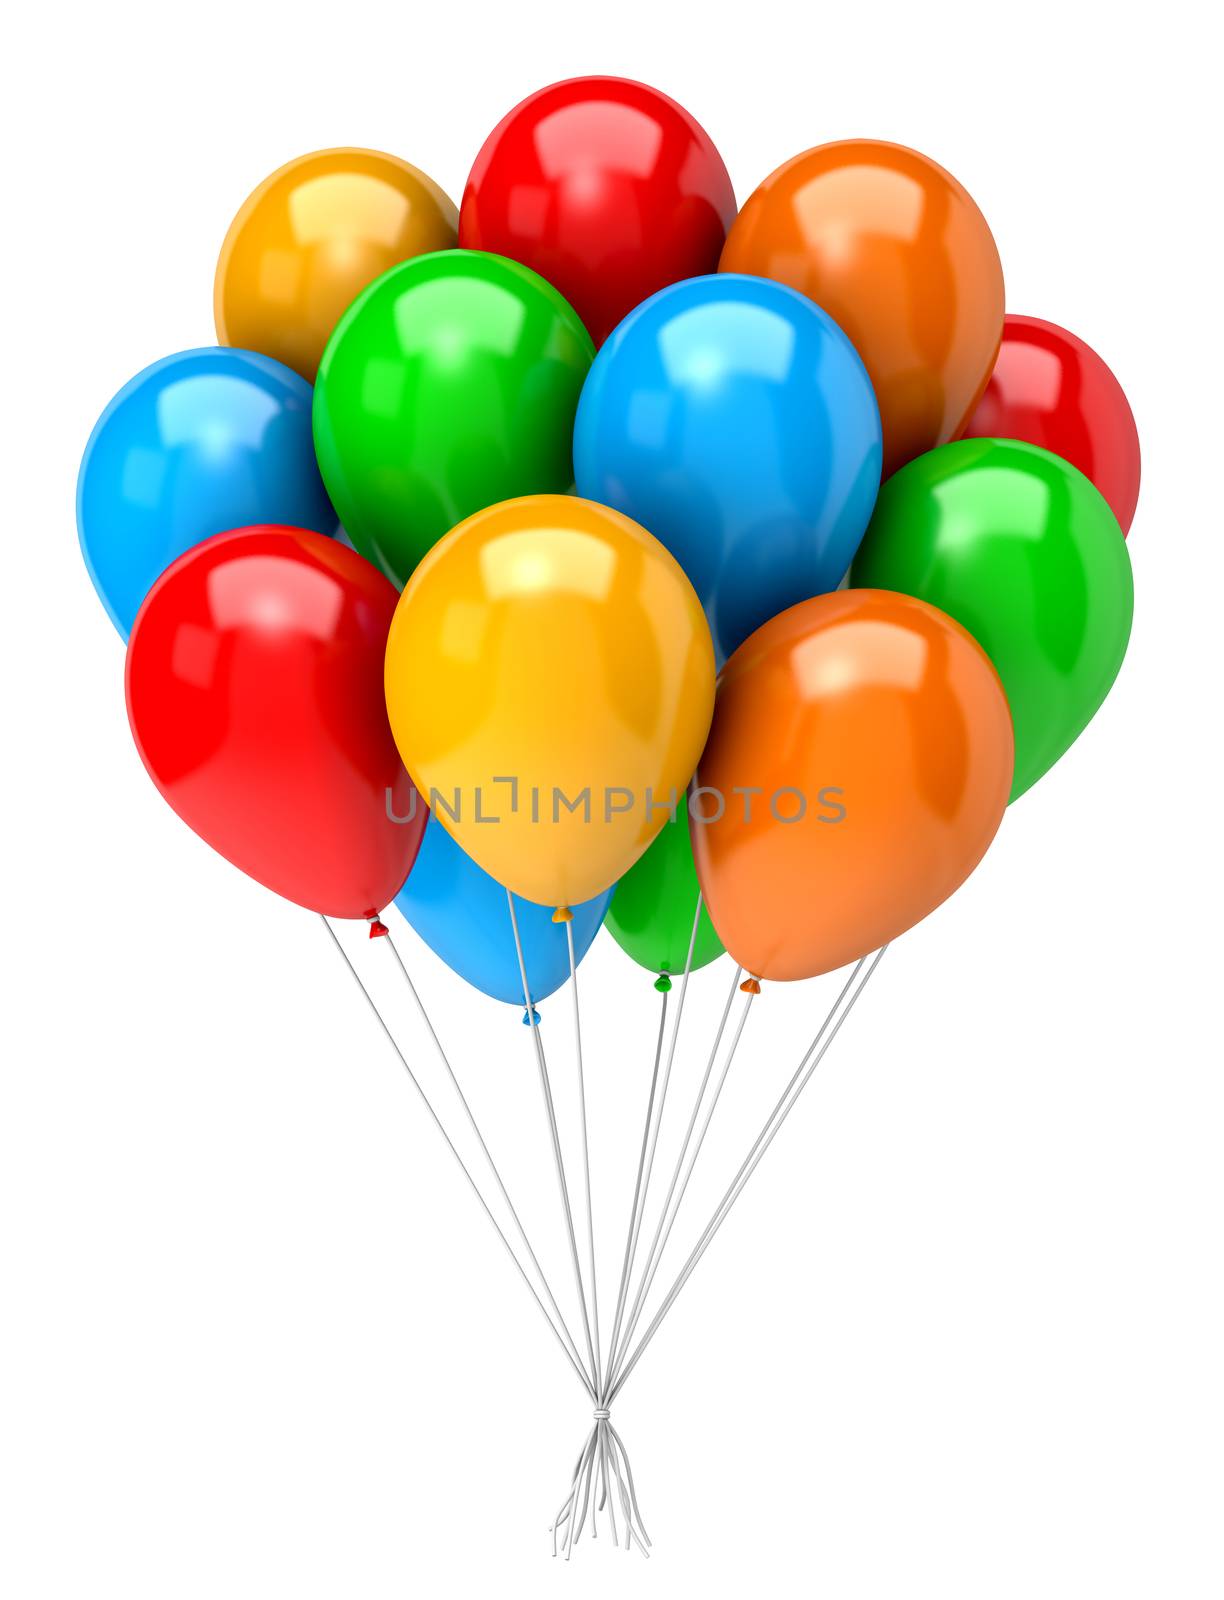 Bunch of Vibrant Color Balloons on White Background 3D Illustration